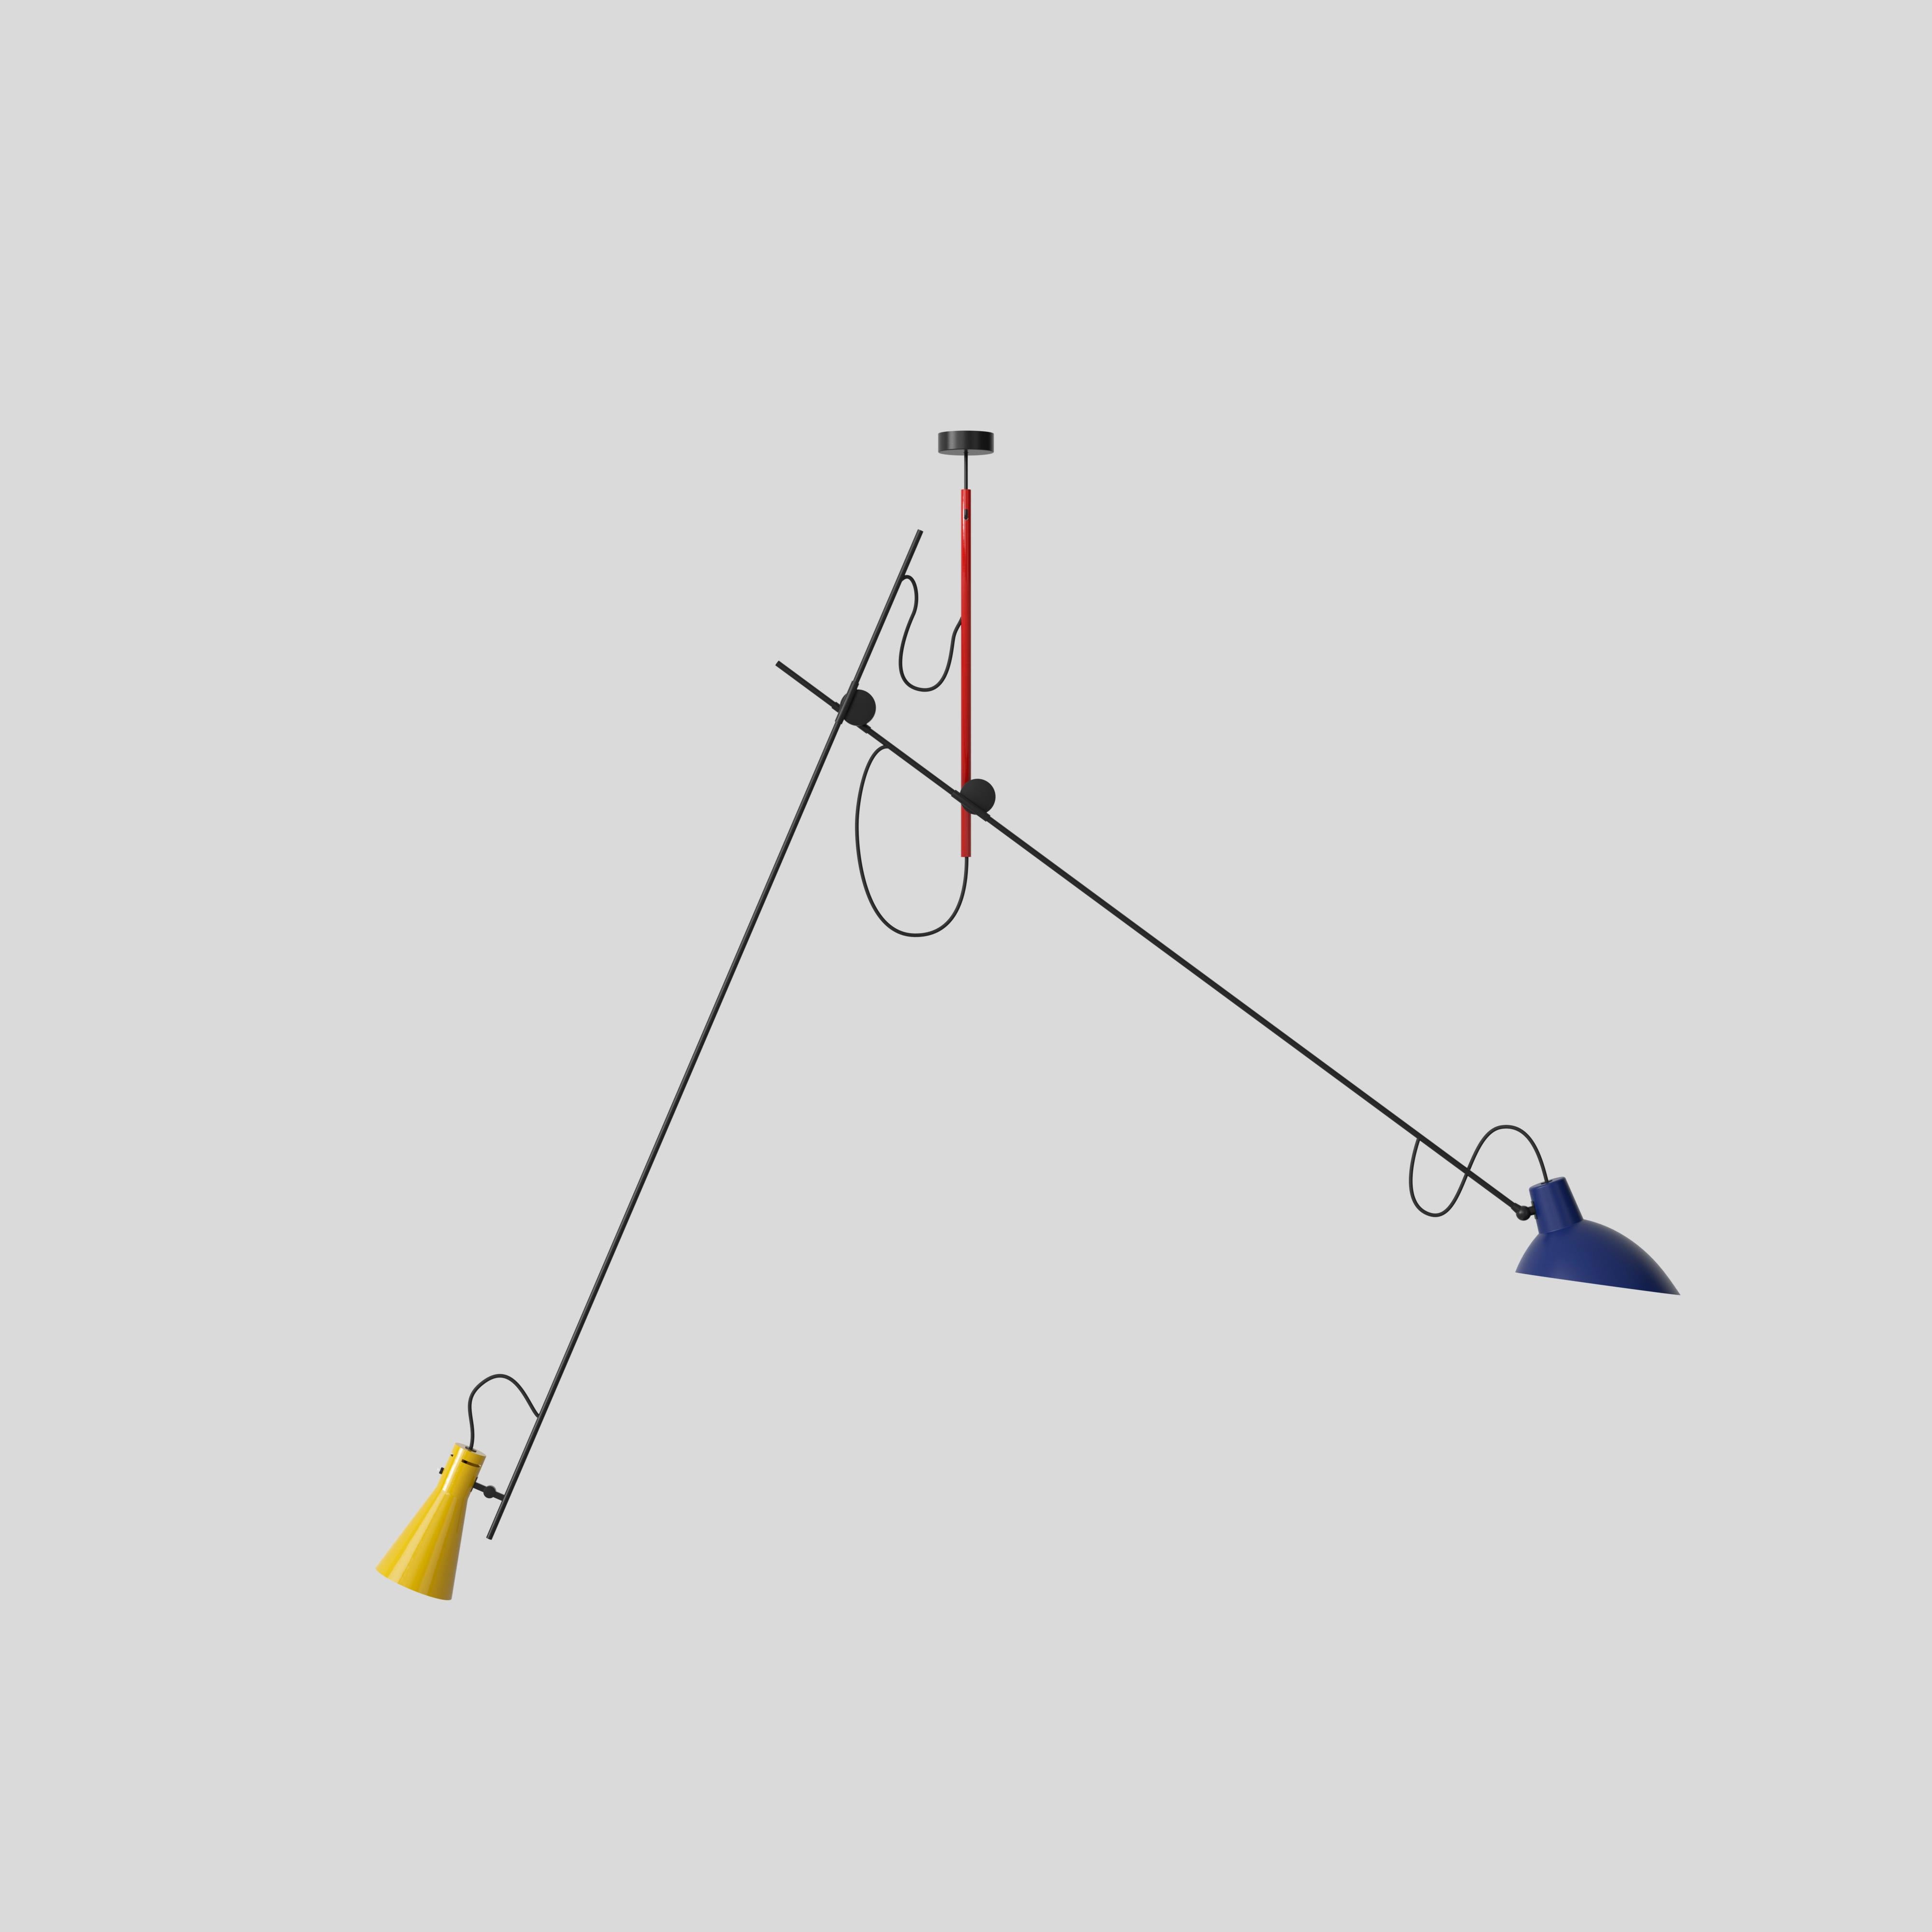 VV Cinquanta suspension lamp
Design by Vittoriano Viganò
This version is special edition with mondrian colors

The VV Cinquanta suspension is elegant and versatile with two posable direct light sources.

With a distinctive dual-stemmed construction,